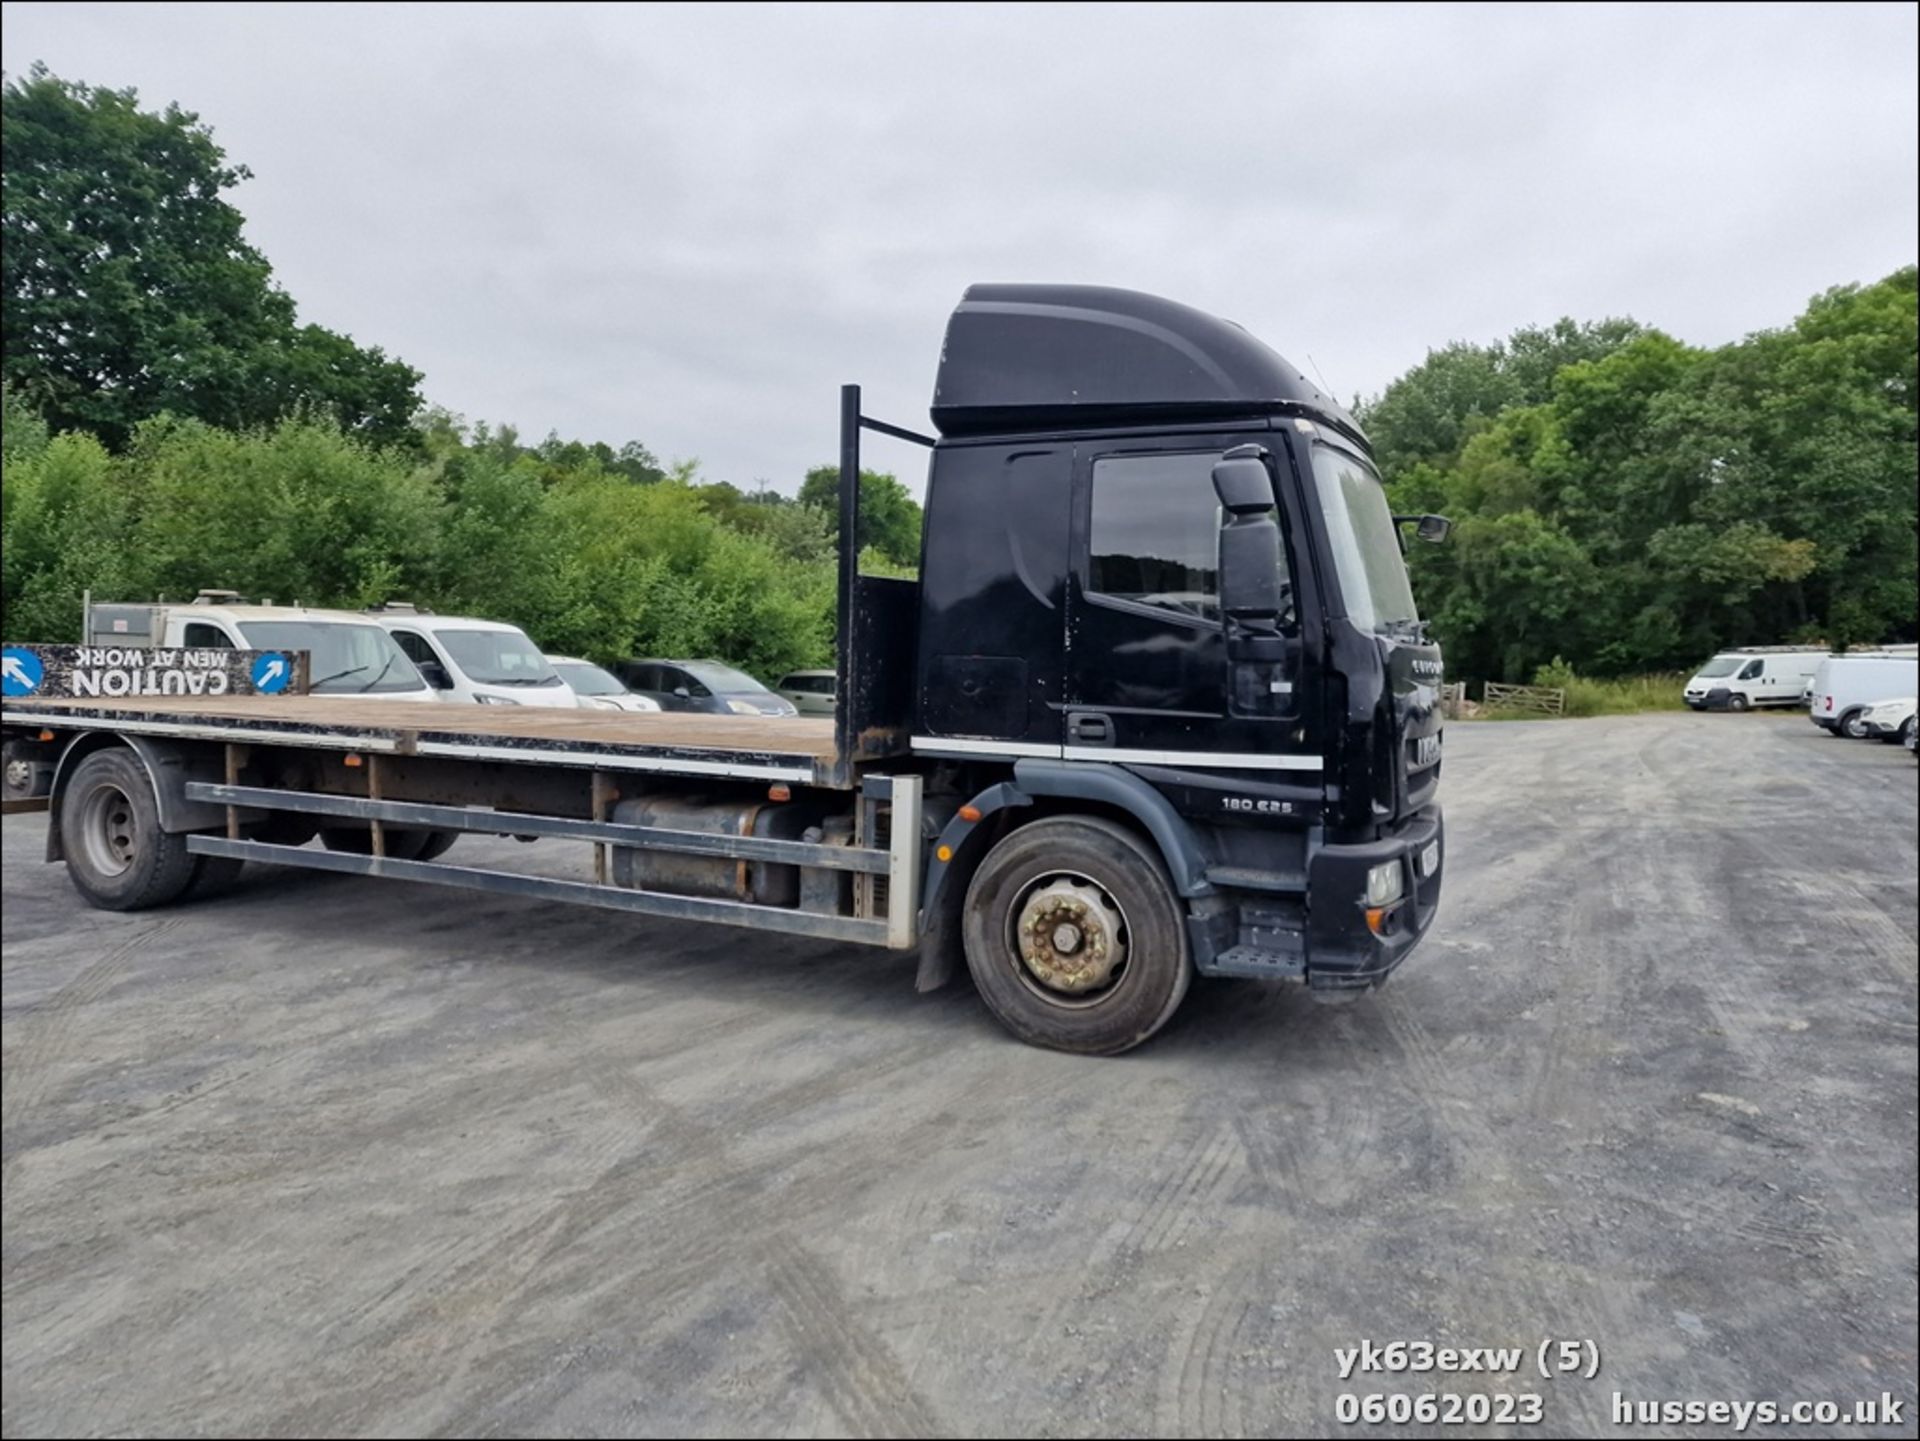 13/63 IVECO EUROCARGO (MY 2008) - 5880cc 2dr Flat Bed (Black) - Image 8 of 21